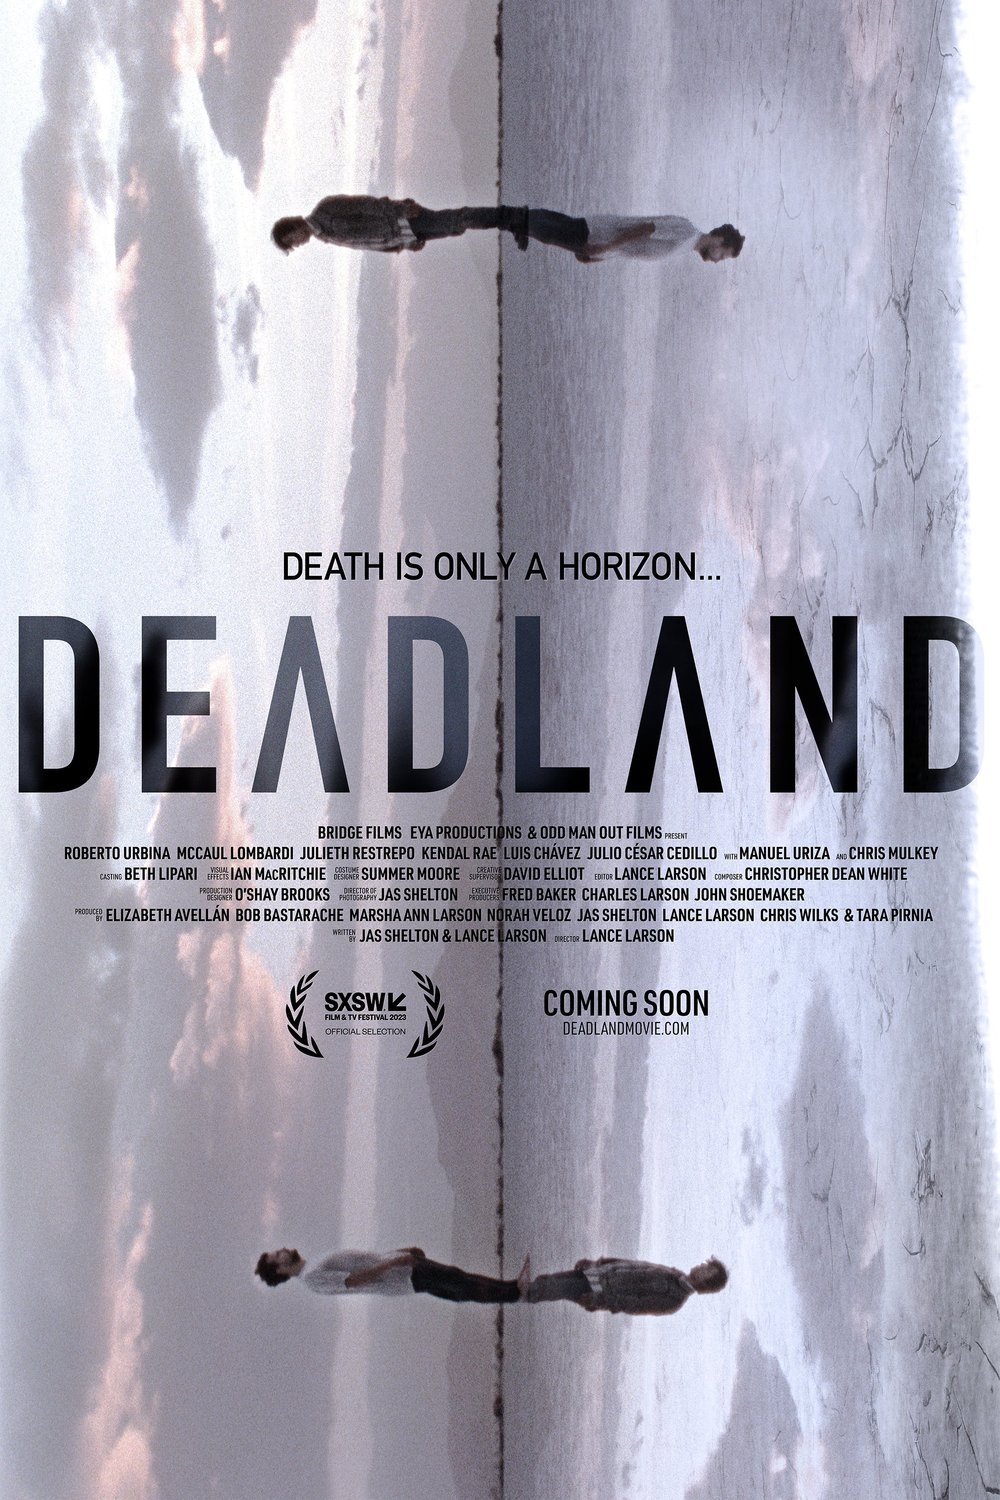 Poster of the movie Deadland